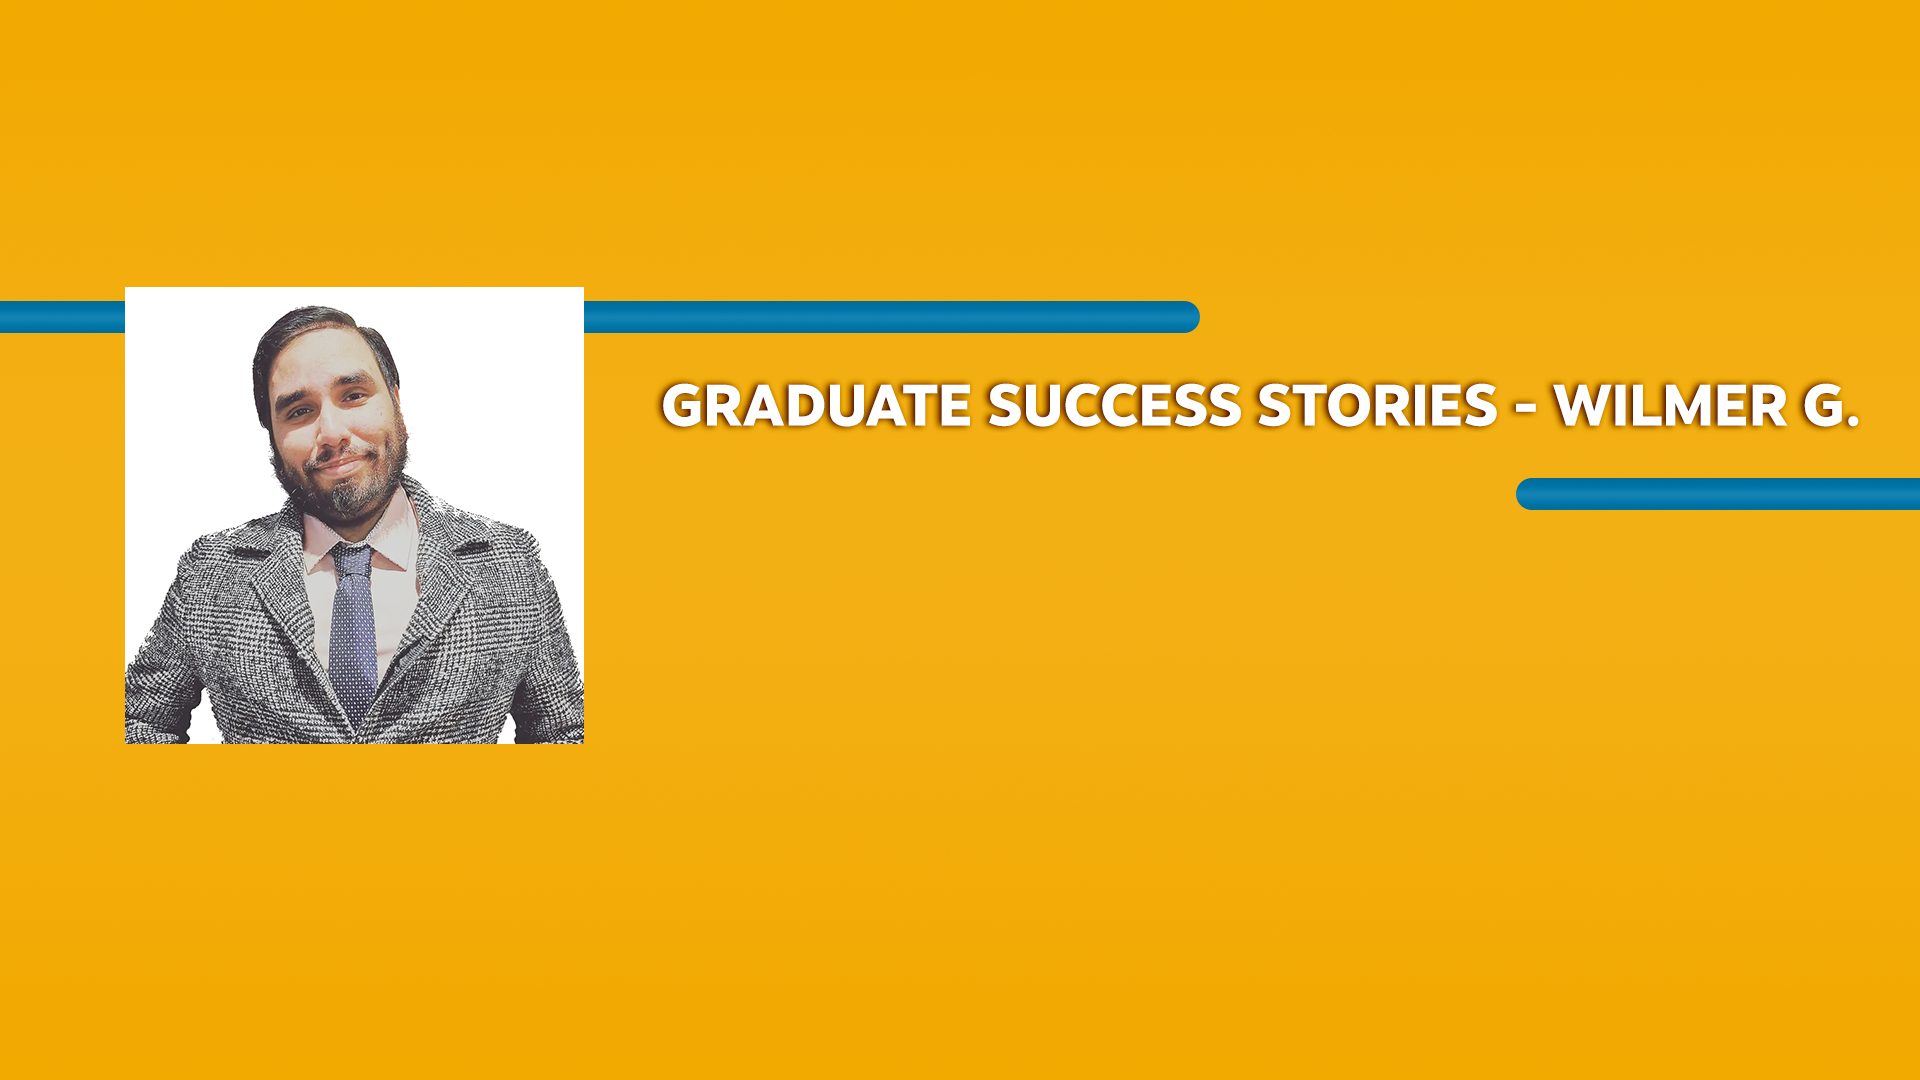 Orange rectangle with a picture of a man wearing a suit and Graduate Success Stories - Wilmer G. text in white font